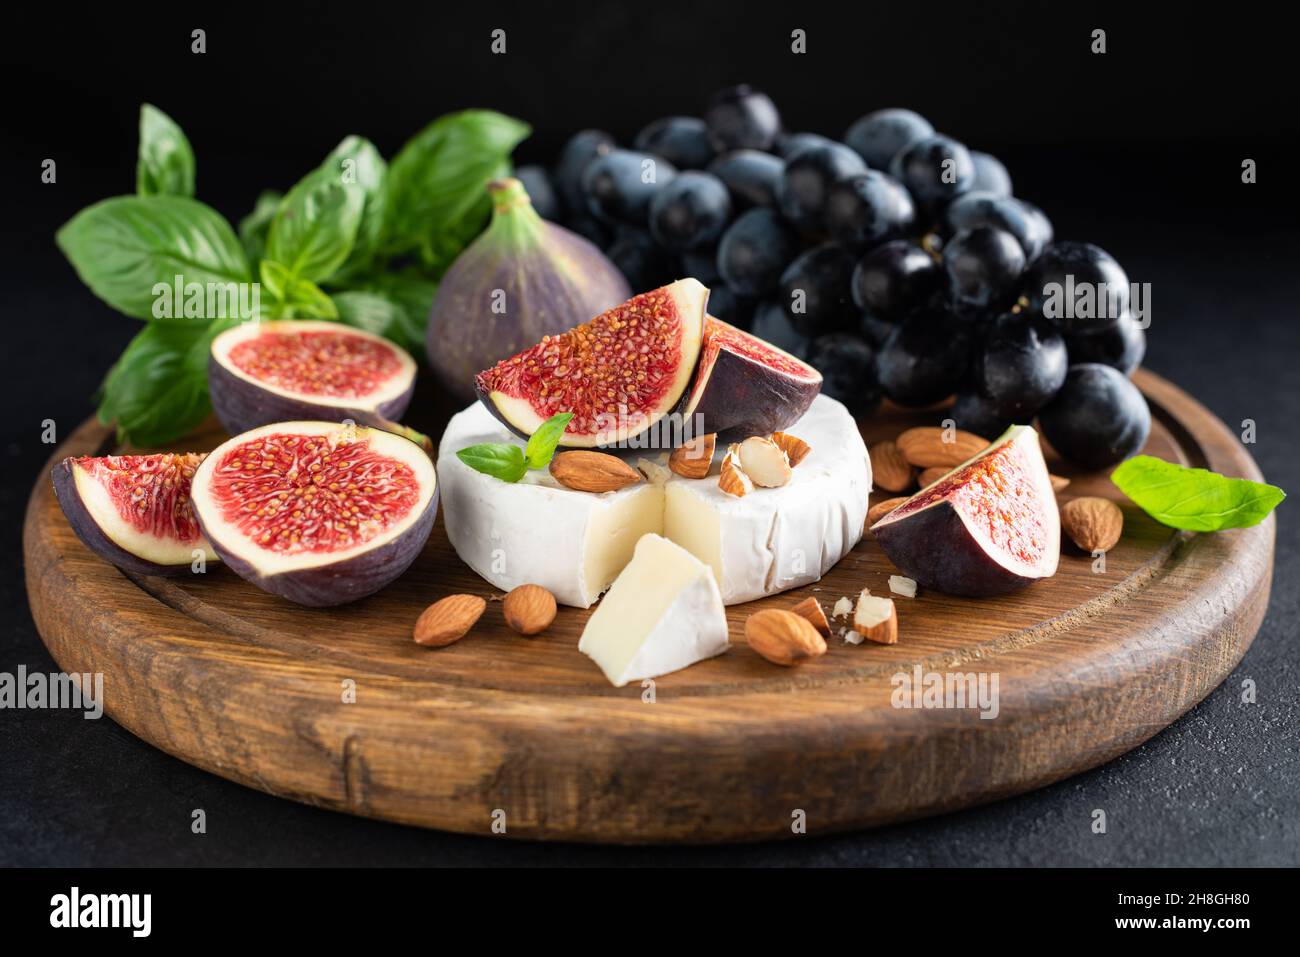 Camembert cheese platter with figs, grapes and nuts. Wooden cheese board Stock Photo